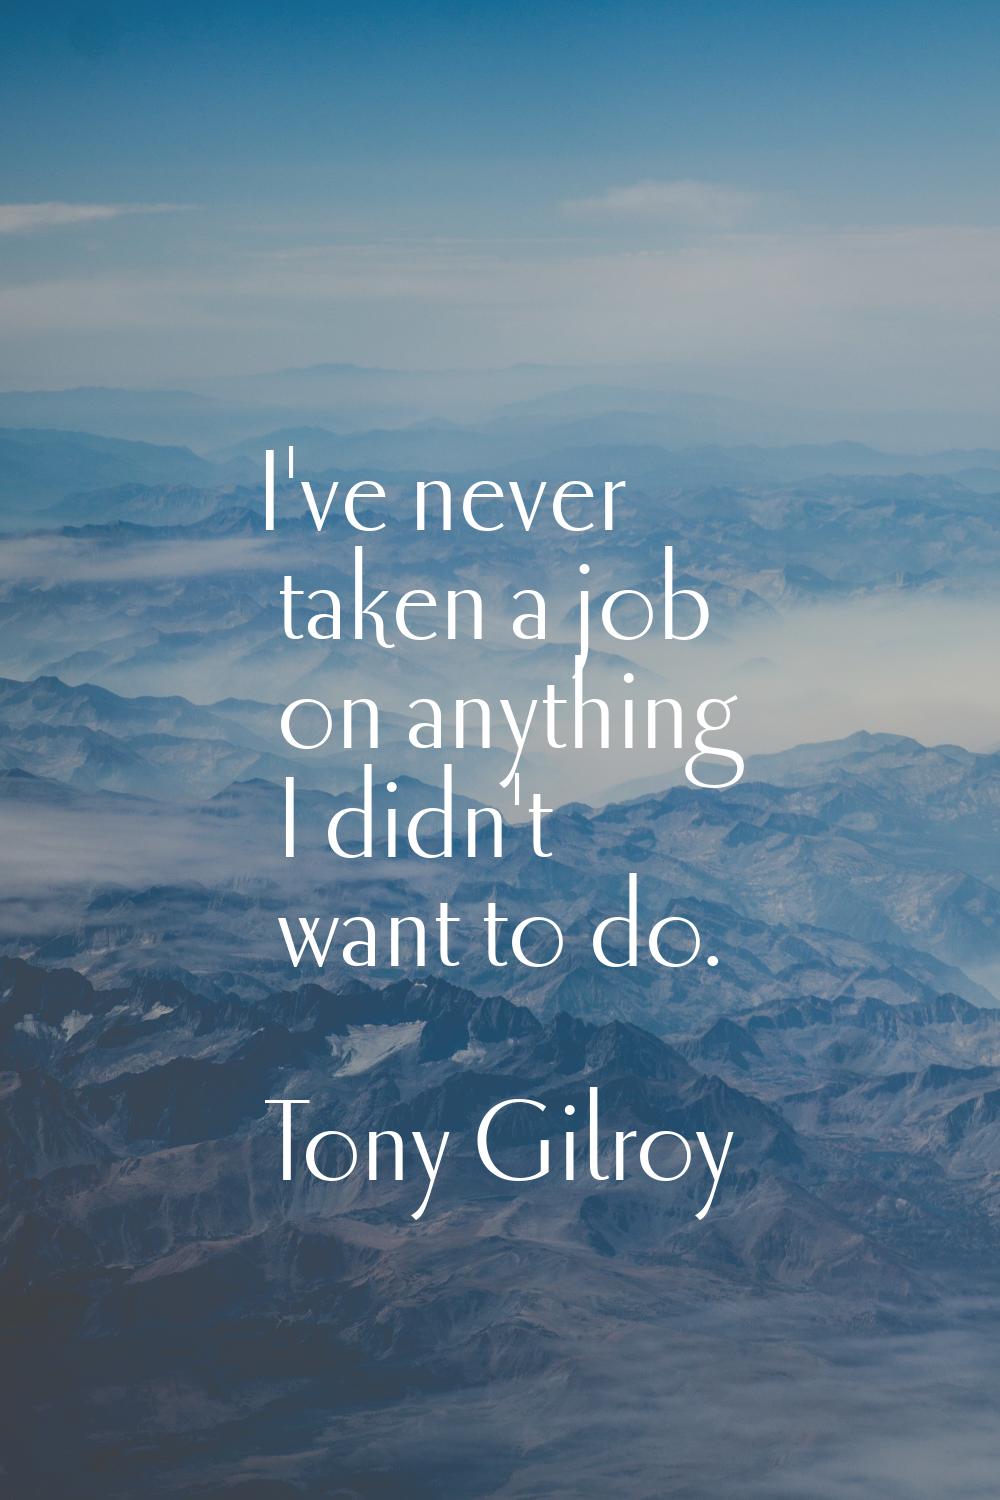 I've never taken a job on anything I didn't want to do.